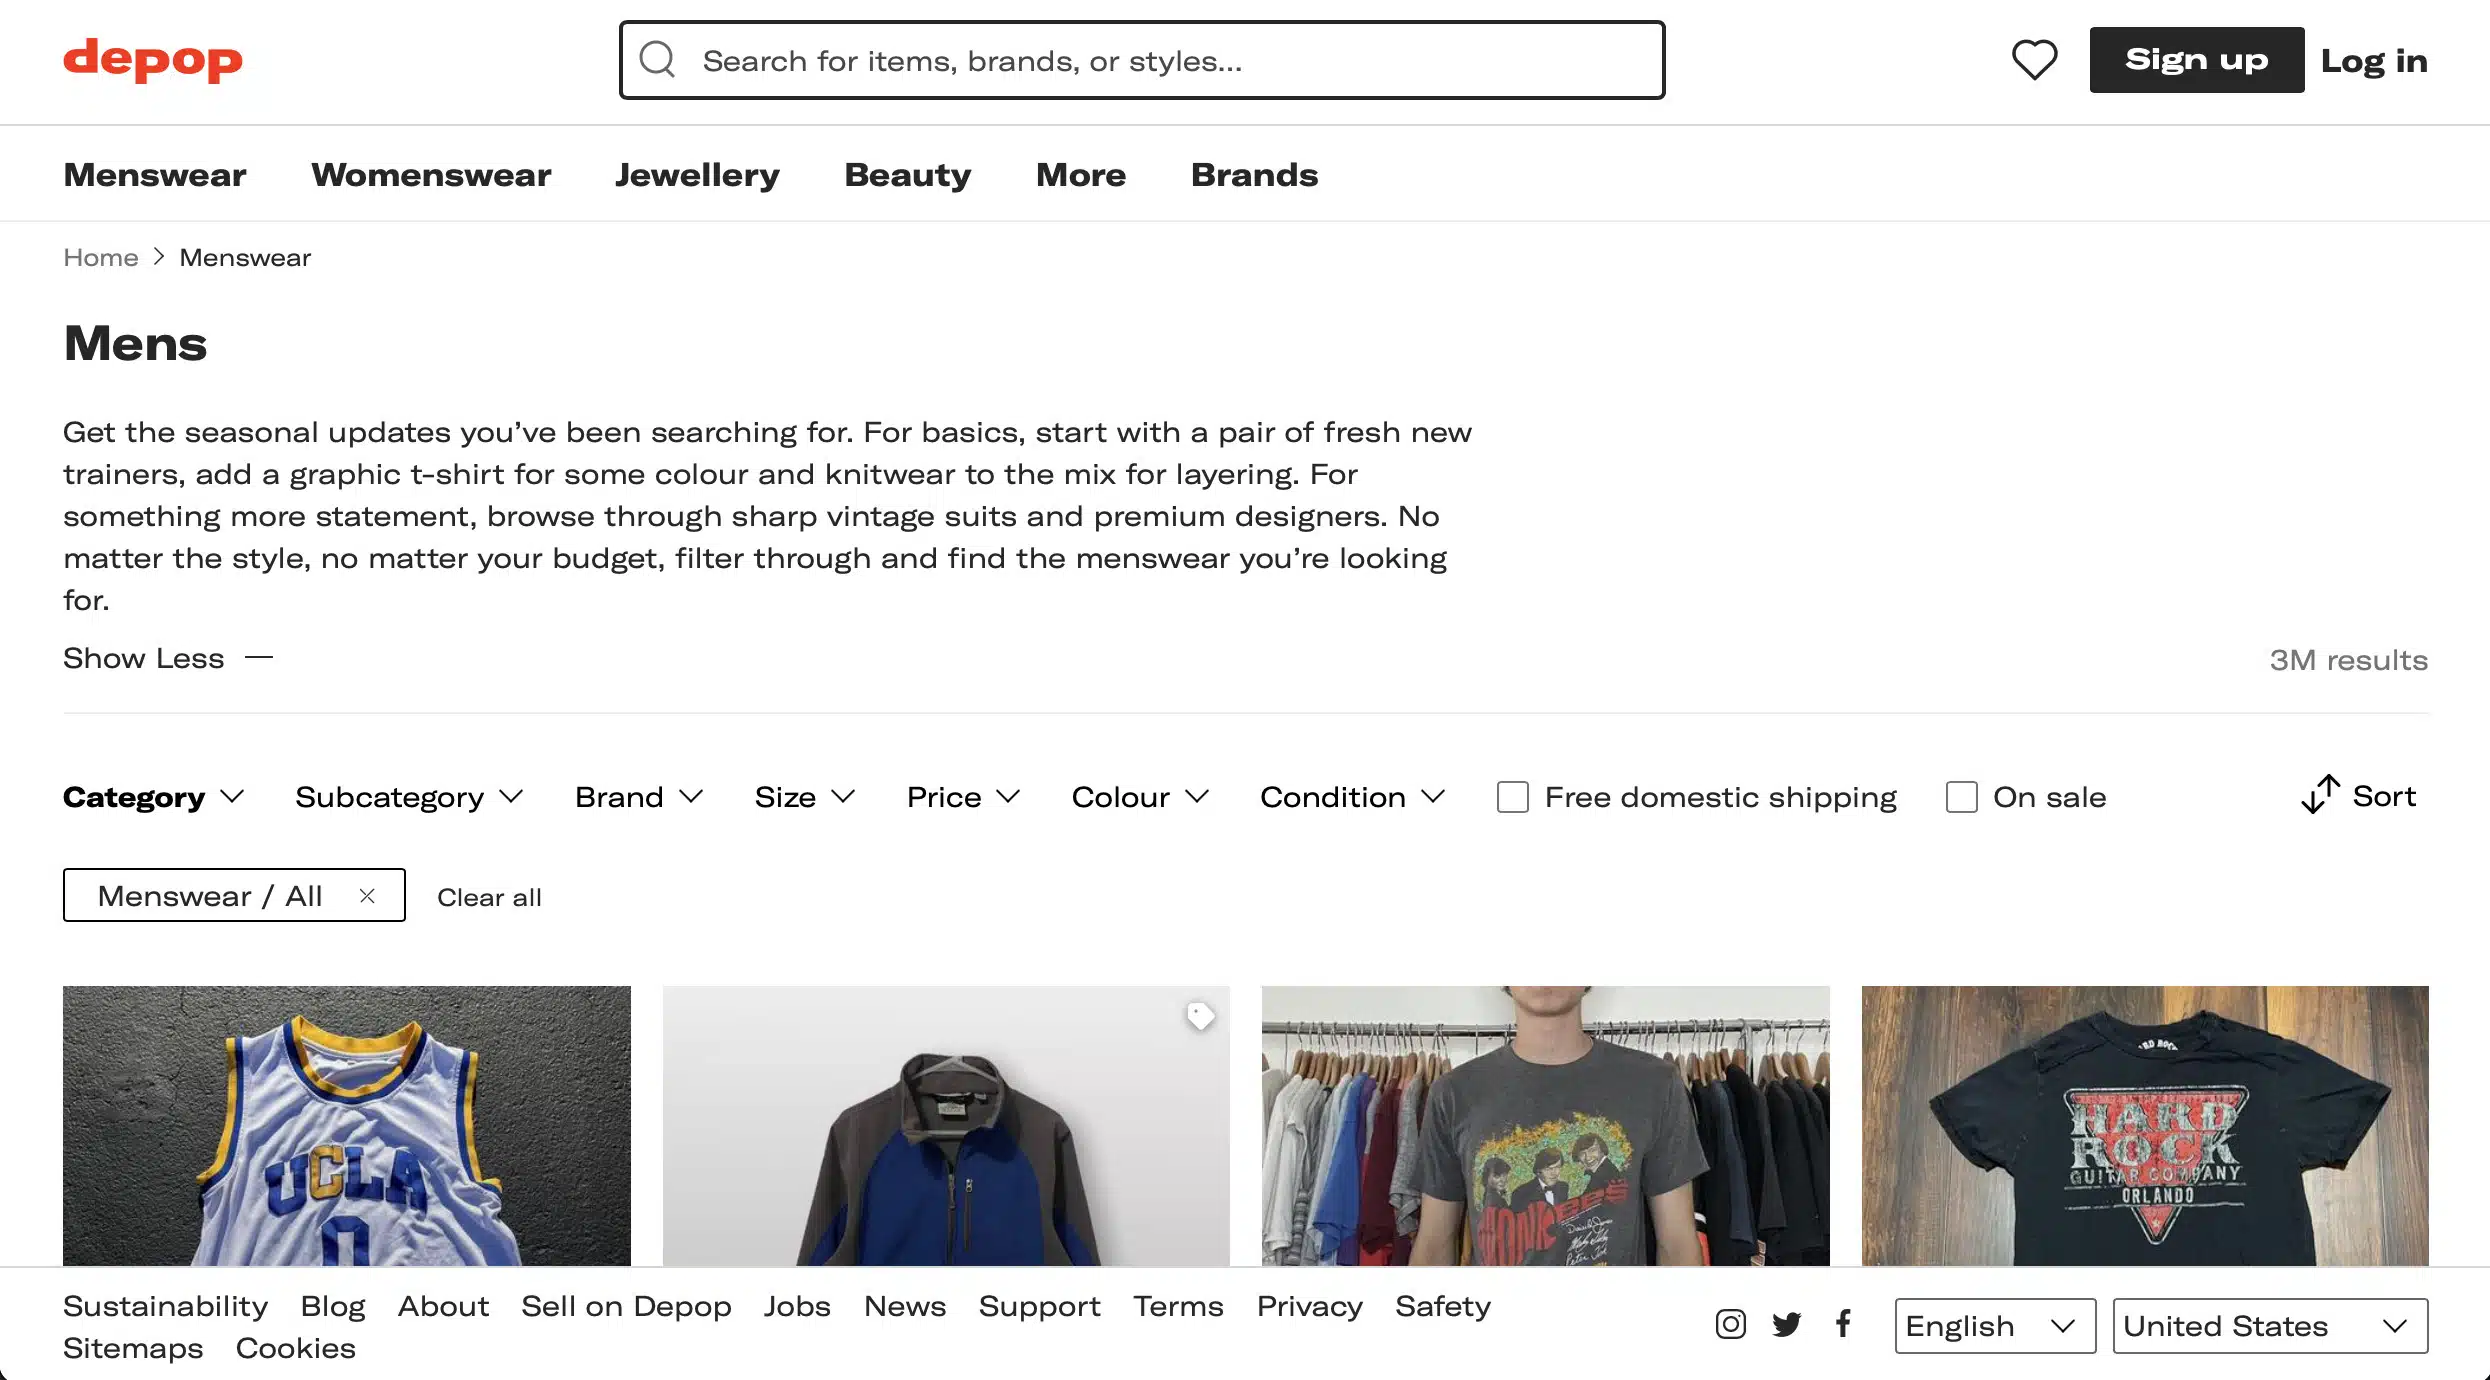 Depop Review: Is It Actually A Trustworthy Site?